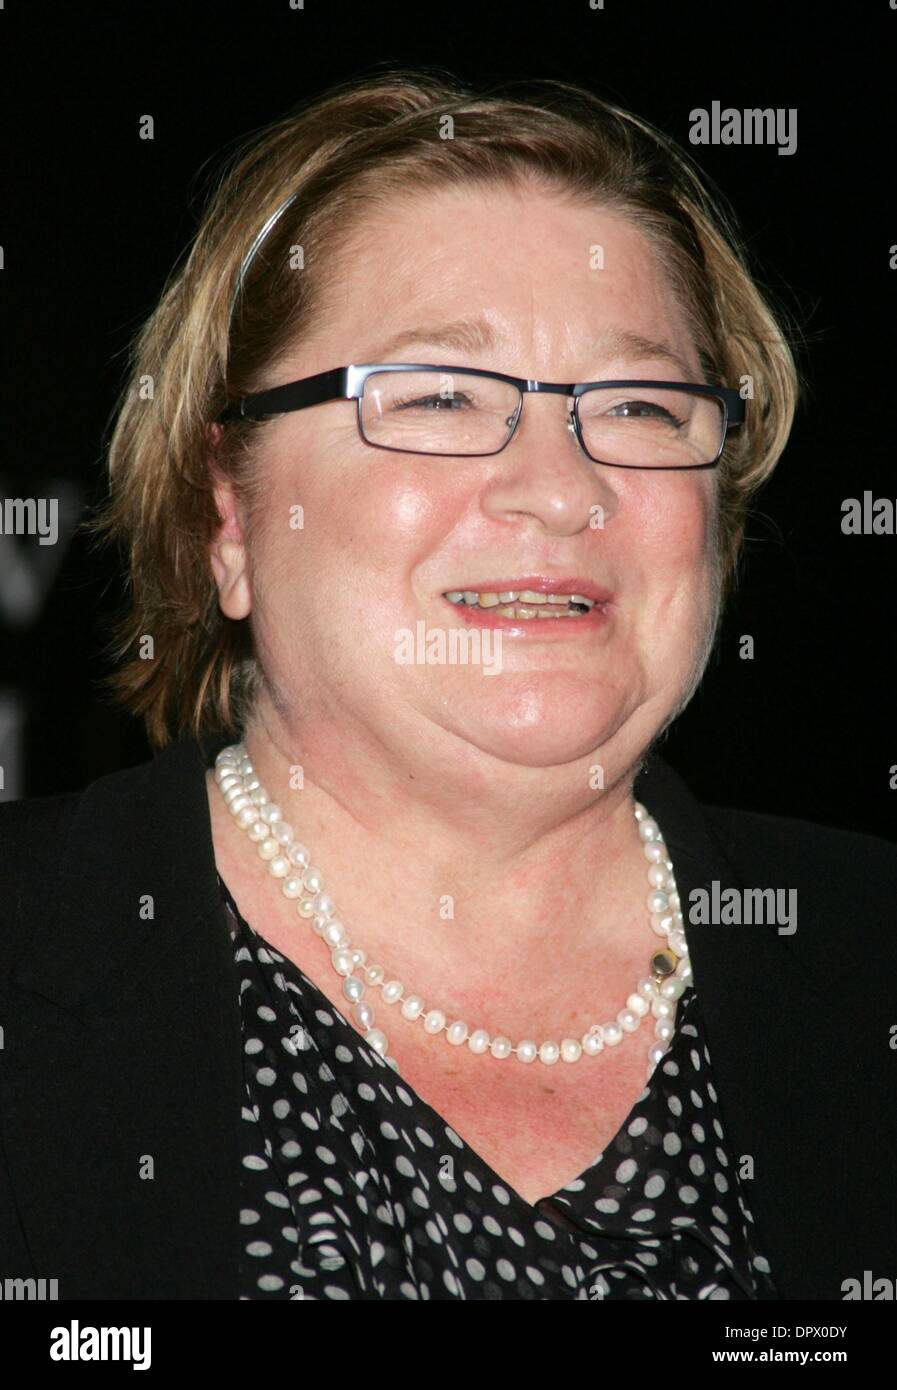 Jan 29, 2009 - New York, New York, USA - Head Disciplinarian ROSEMARY SHRAGER attends the press conference introducing new  MTV reality show 'The Girls of Hedsor Hall' at Trump Tower. (Credit Image: Â© Nancy Kaszerman/ZUMA Press) Stock Photo